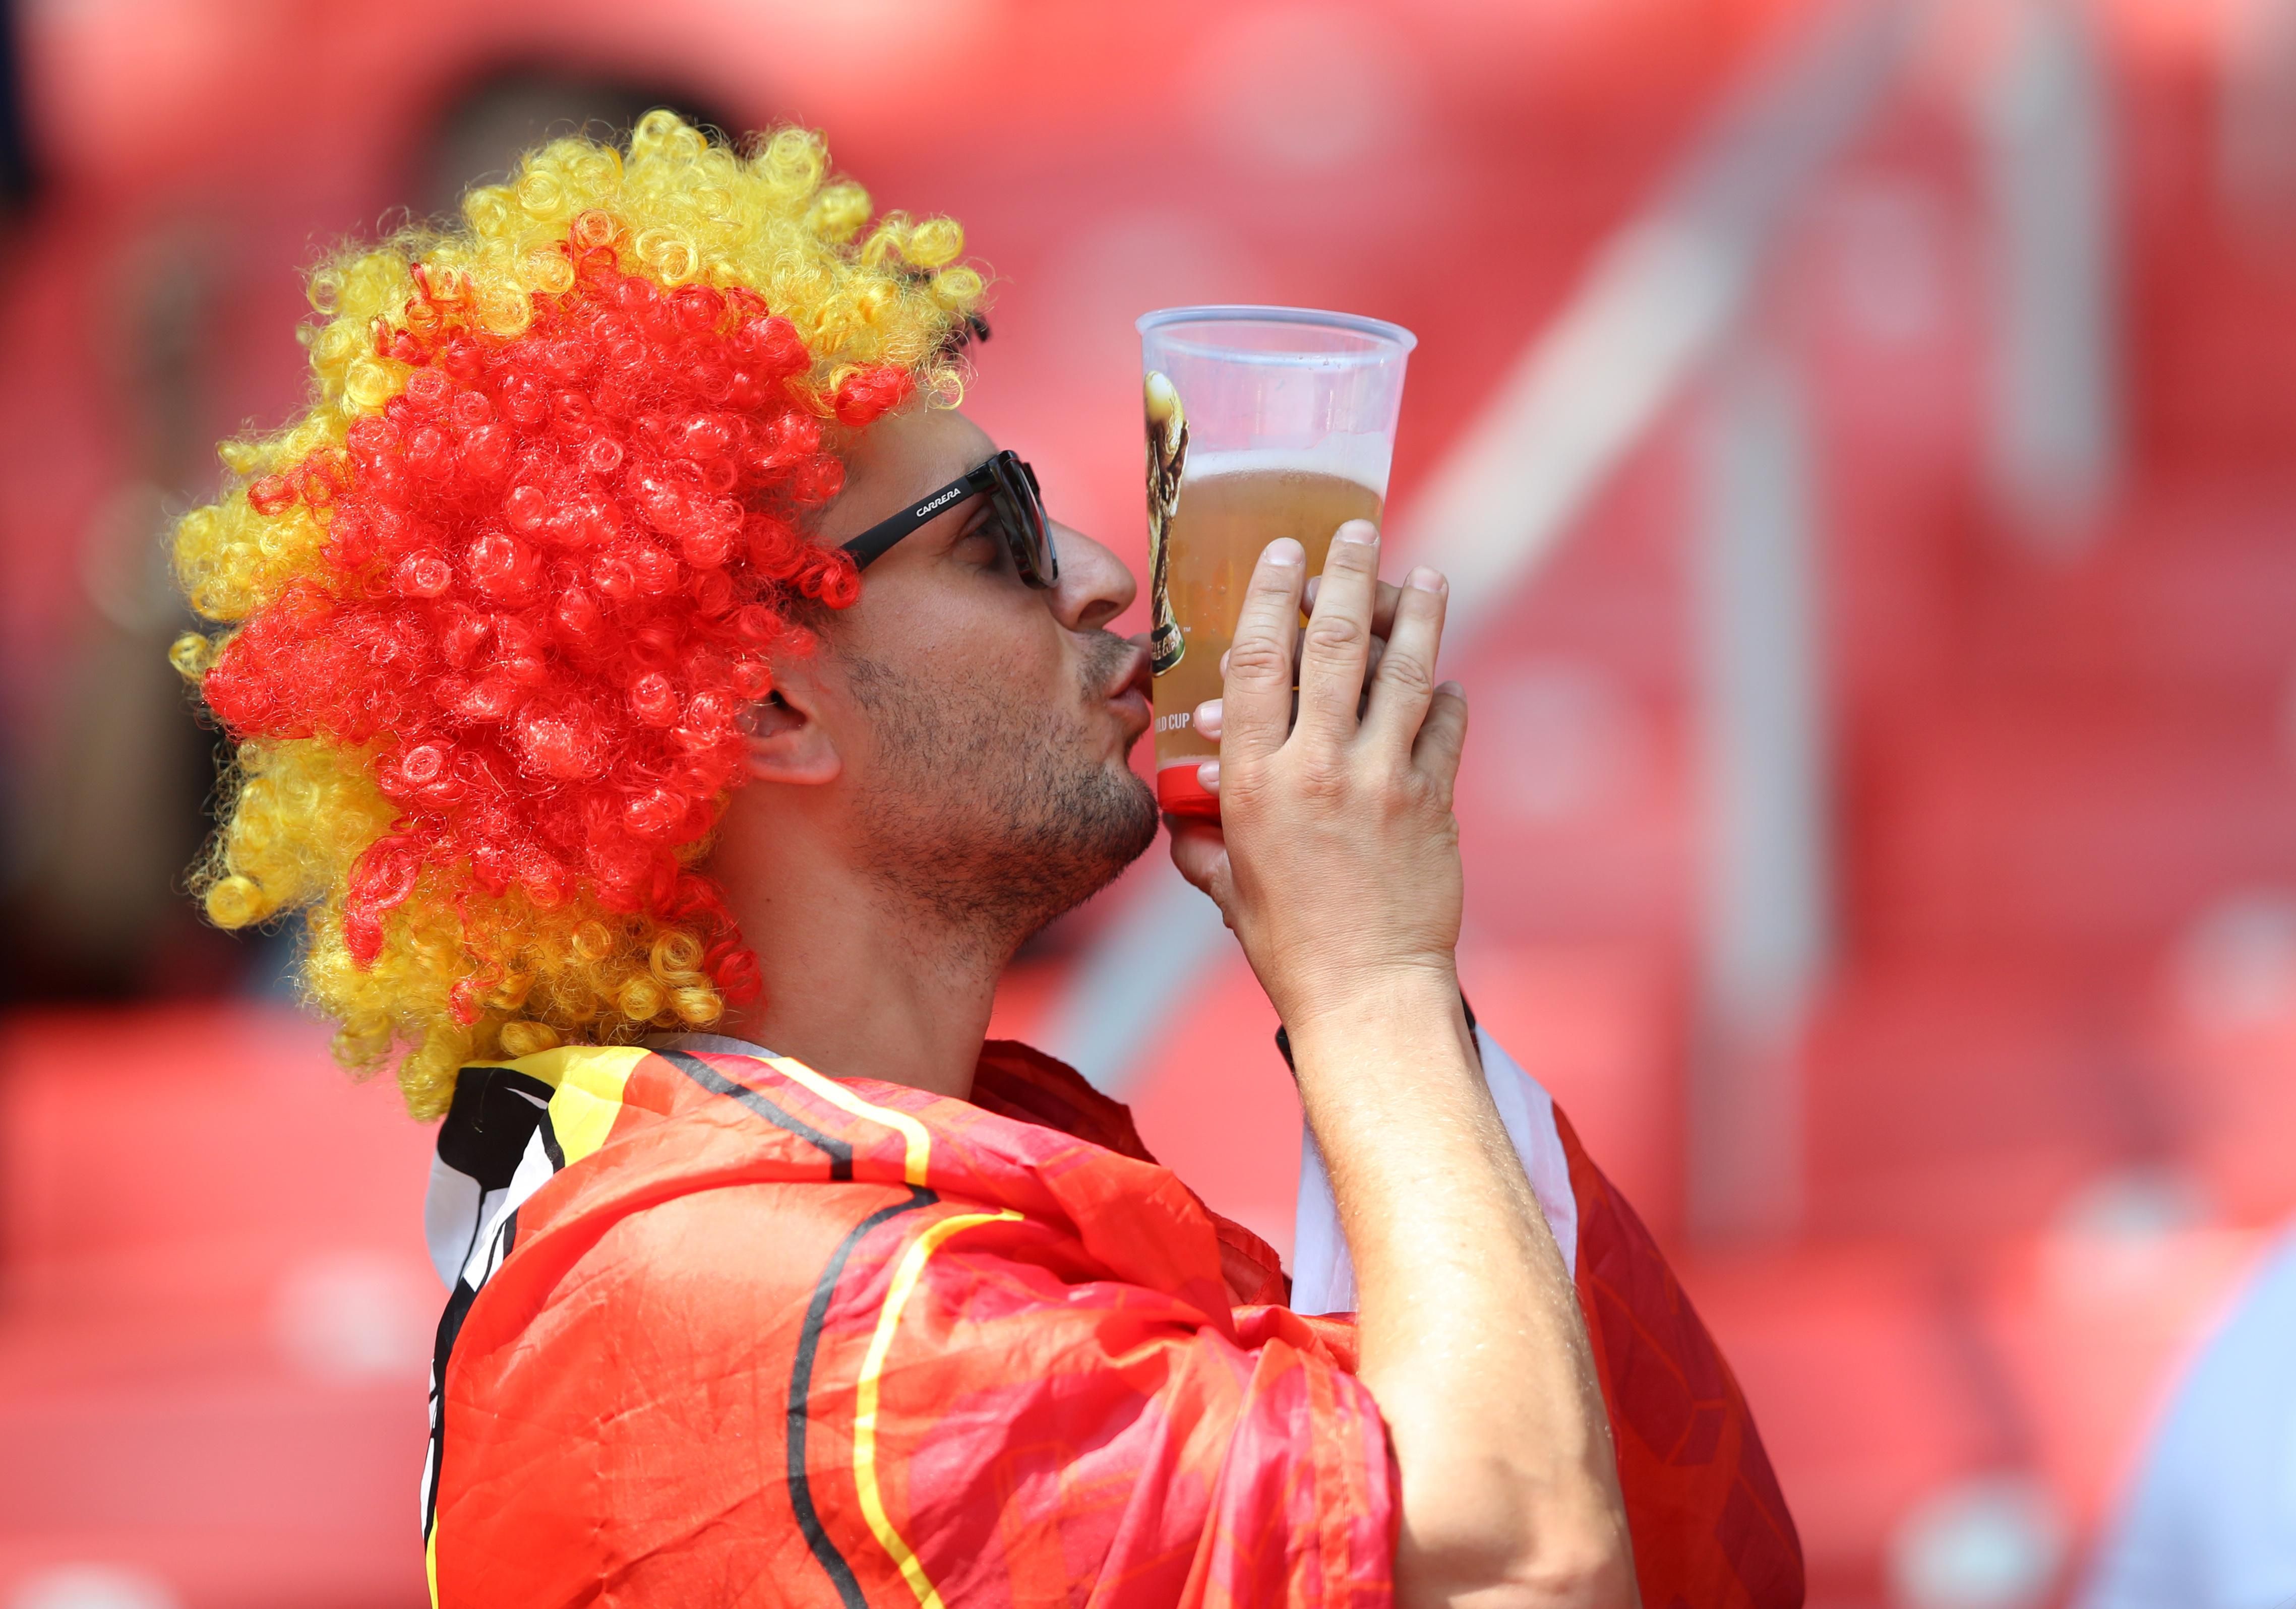 Belgium fan kisses World Cup insignia on his plastic glass of beer before a match at the 2018 Russia World Cup.